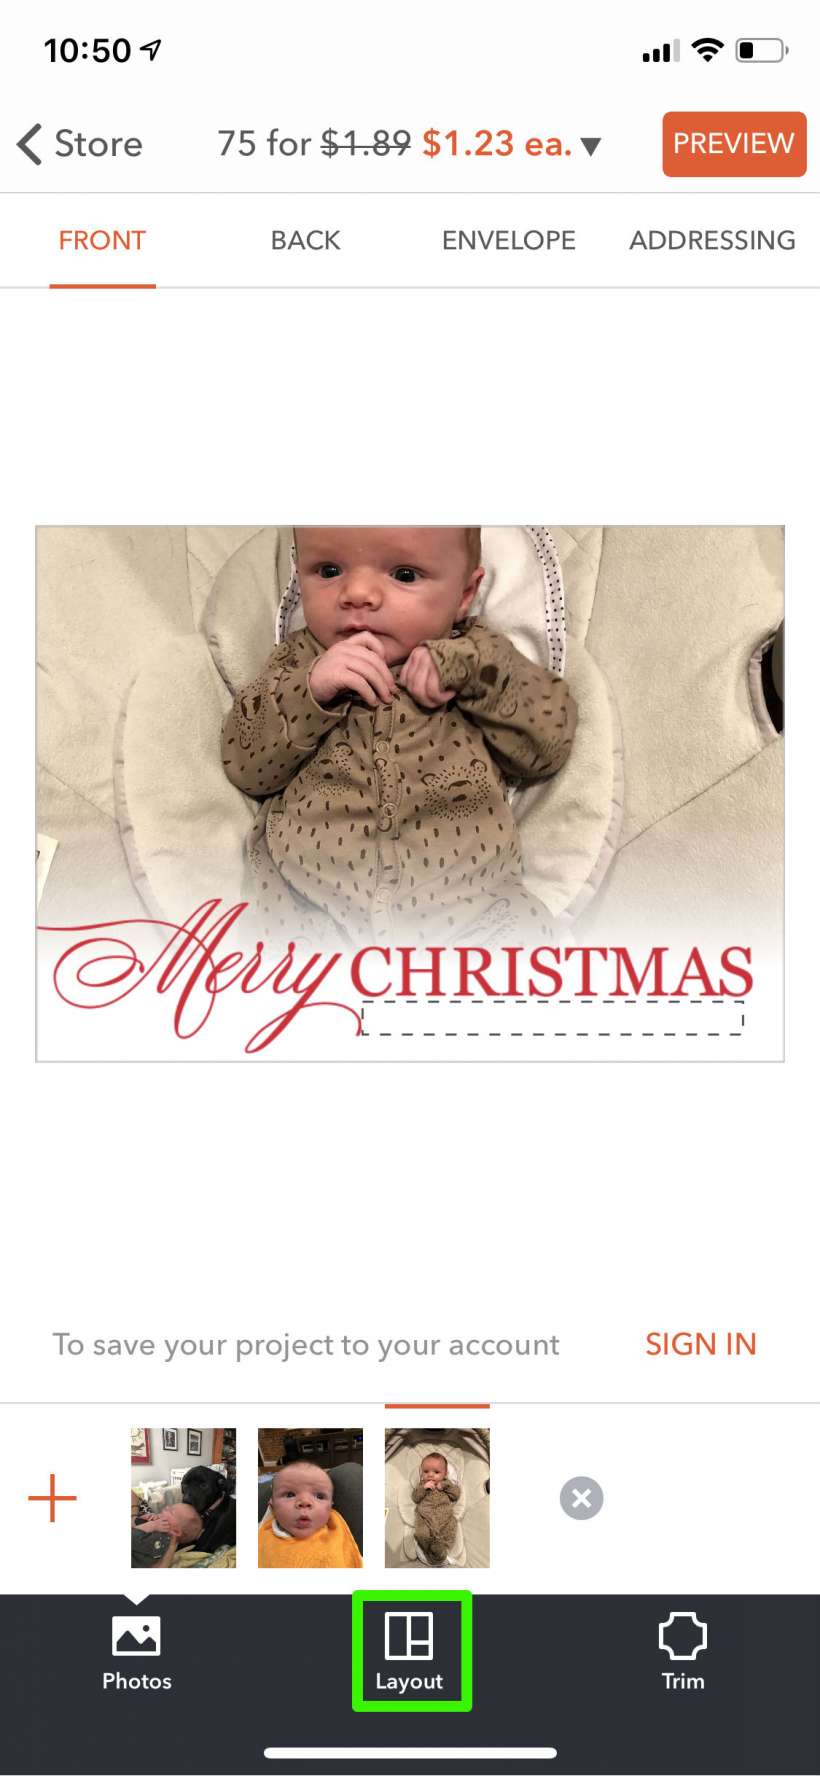 How to make Christmas and holiday cards on your iPhone and iPad with Shutterfly.